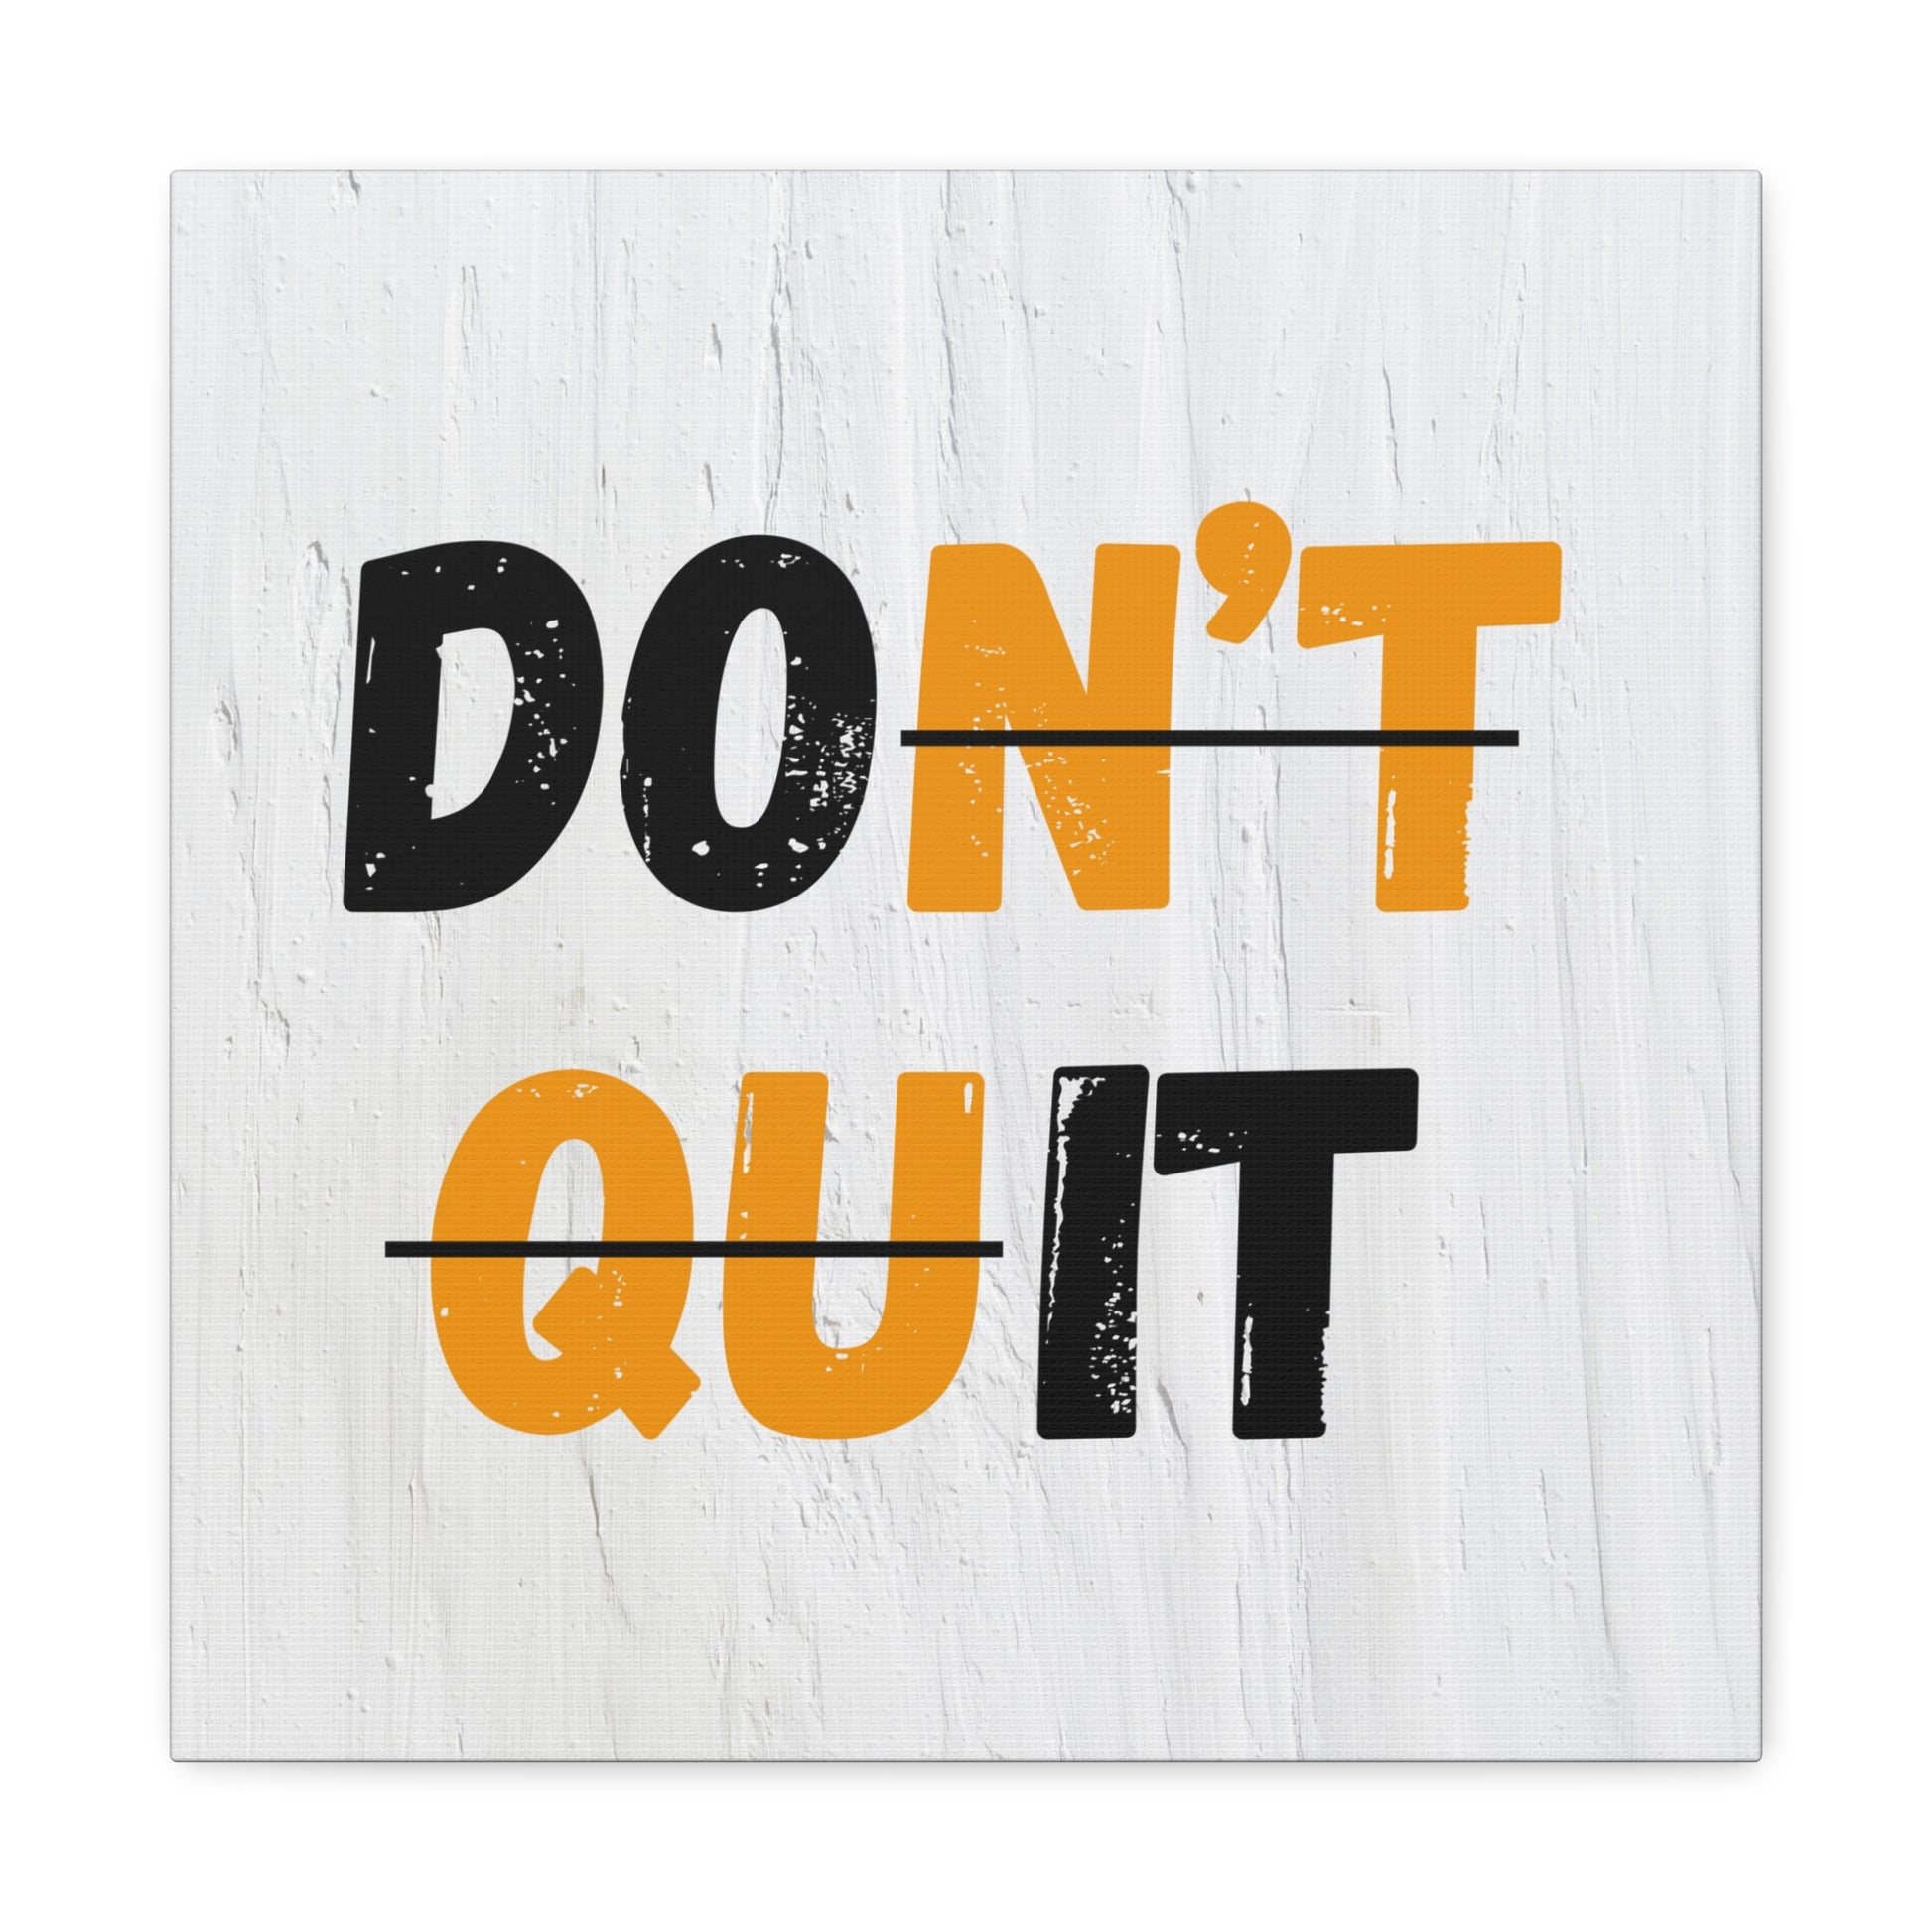 "Don't Quit" Wall Art - Weave Got Gifts - Unique Gifts You Won’t Find Anywhere Else!